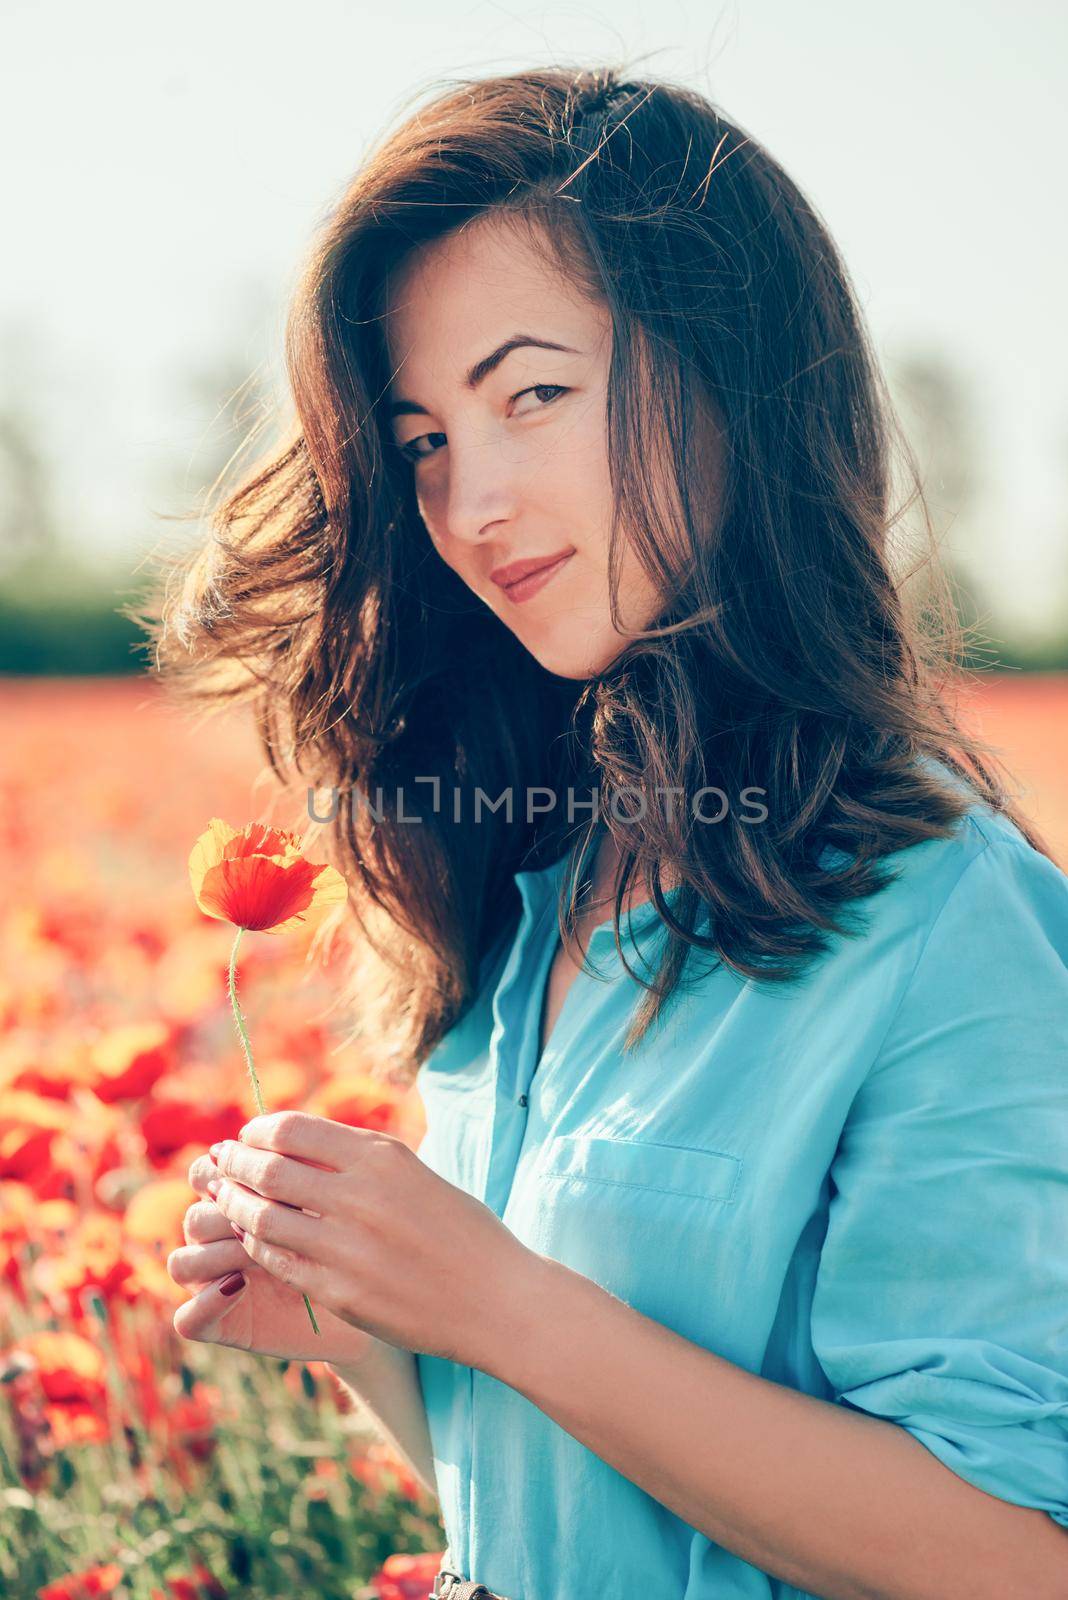 Beautiful young woman holding poppy flower and looking at camera in spring meadow outdoor.